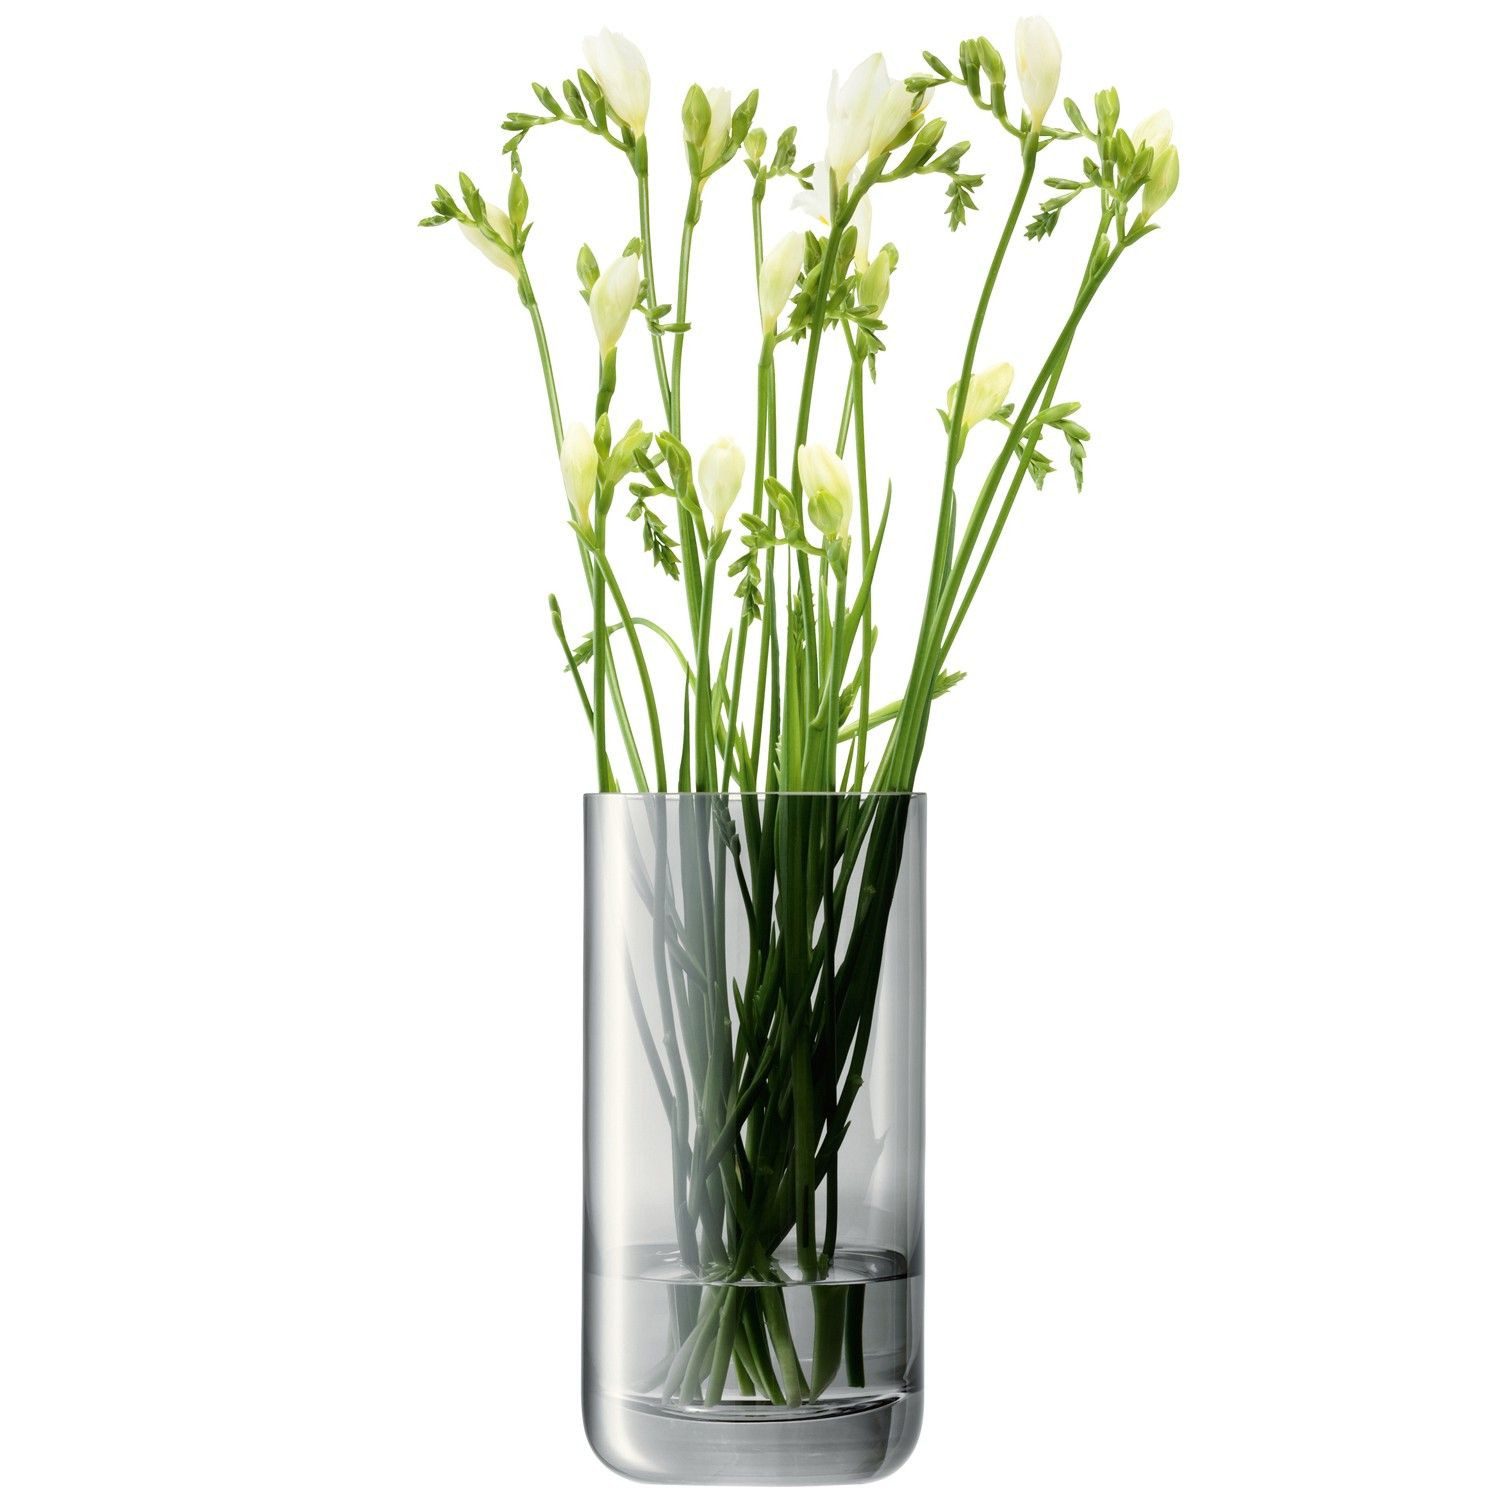 22 Awesome Floral Stones for Vases 2024 free download floral stones for vases of polka sheer zinc h26cm this mouthblown vase is handpainted in intended for polka sheer zinc h26cm this mouthblown vase is handpainted in popular metallic lustre